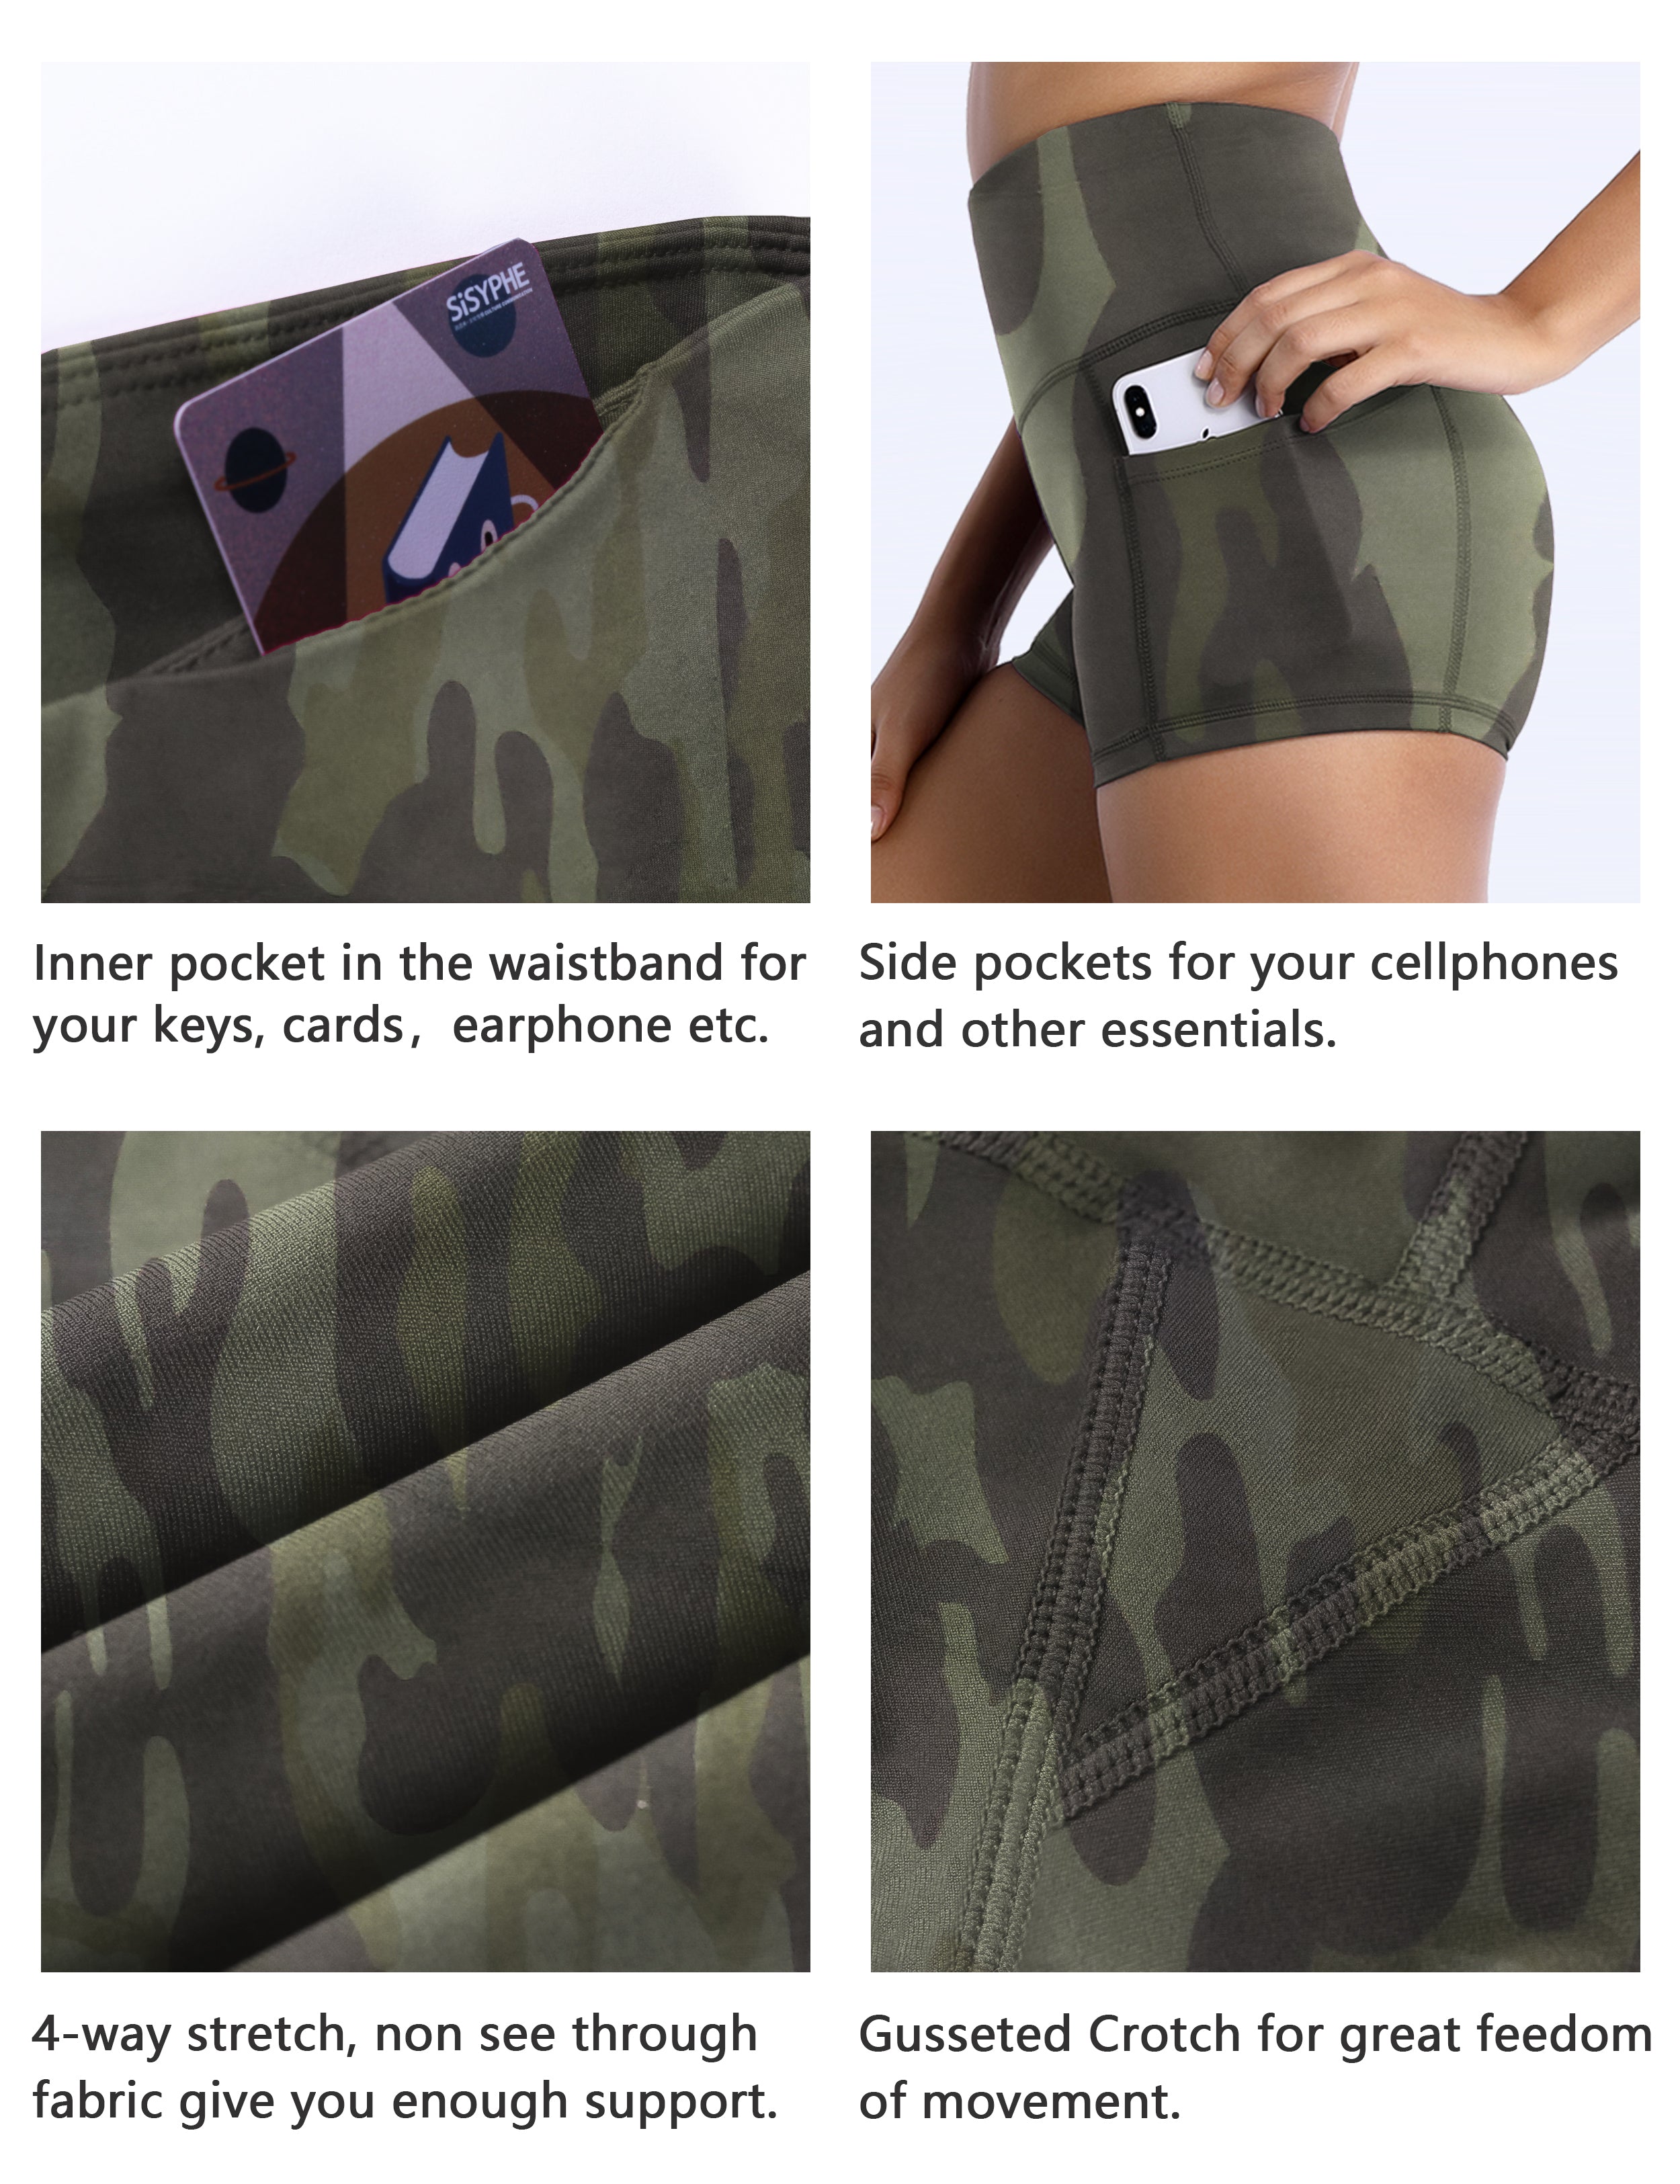 2.5" Printed Side Pockets Jogging Shorts green camo Sleek, soft, smooth and totally comfortable: our newest sexy style is here. Softest-ever fabric High elasticity High density 4-way stretch Fabric doesn't attract lint easily No see-through Moisture-wicking Machine wash 78% Polyester, 22% Spandex